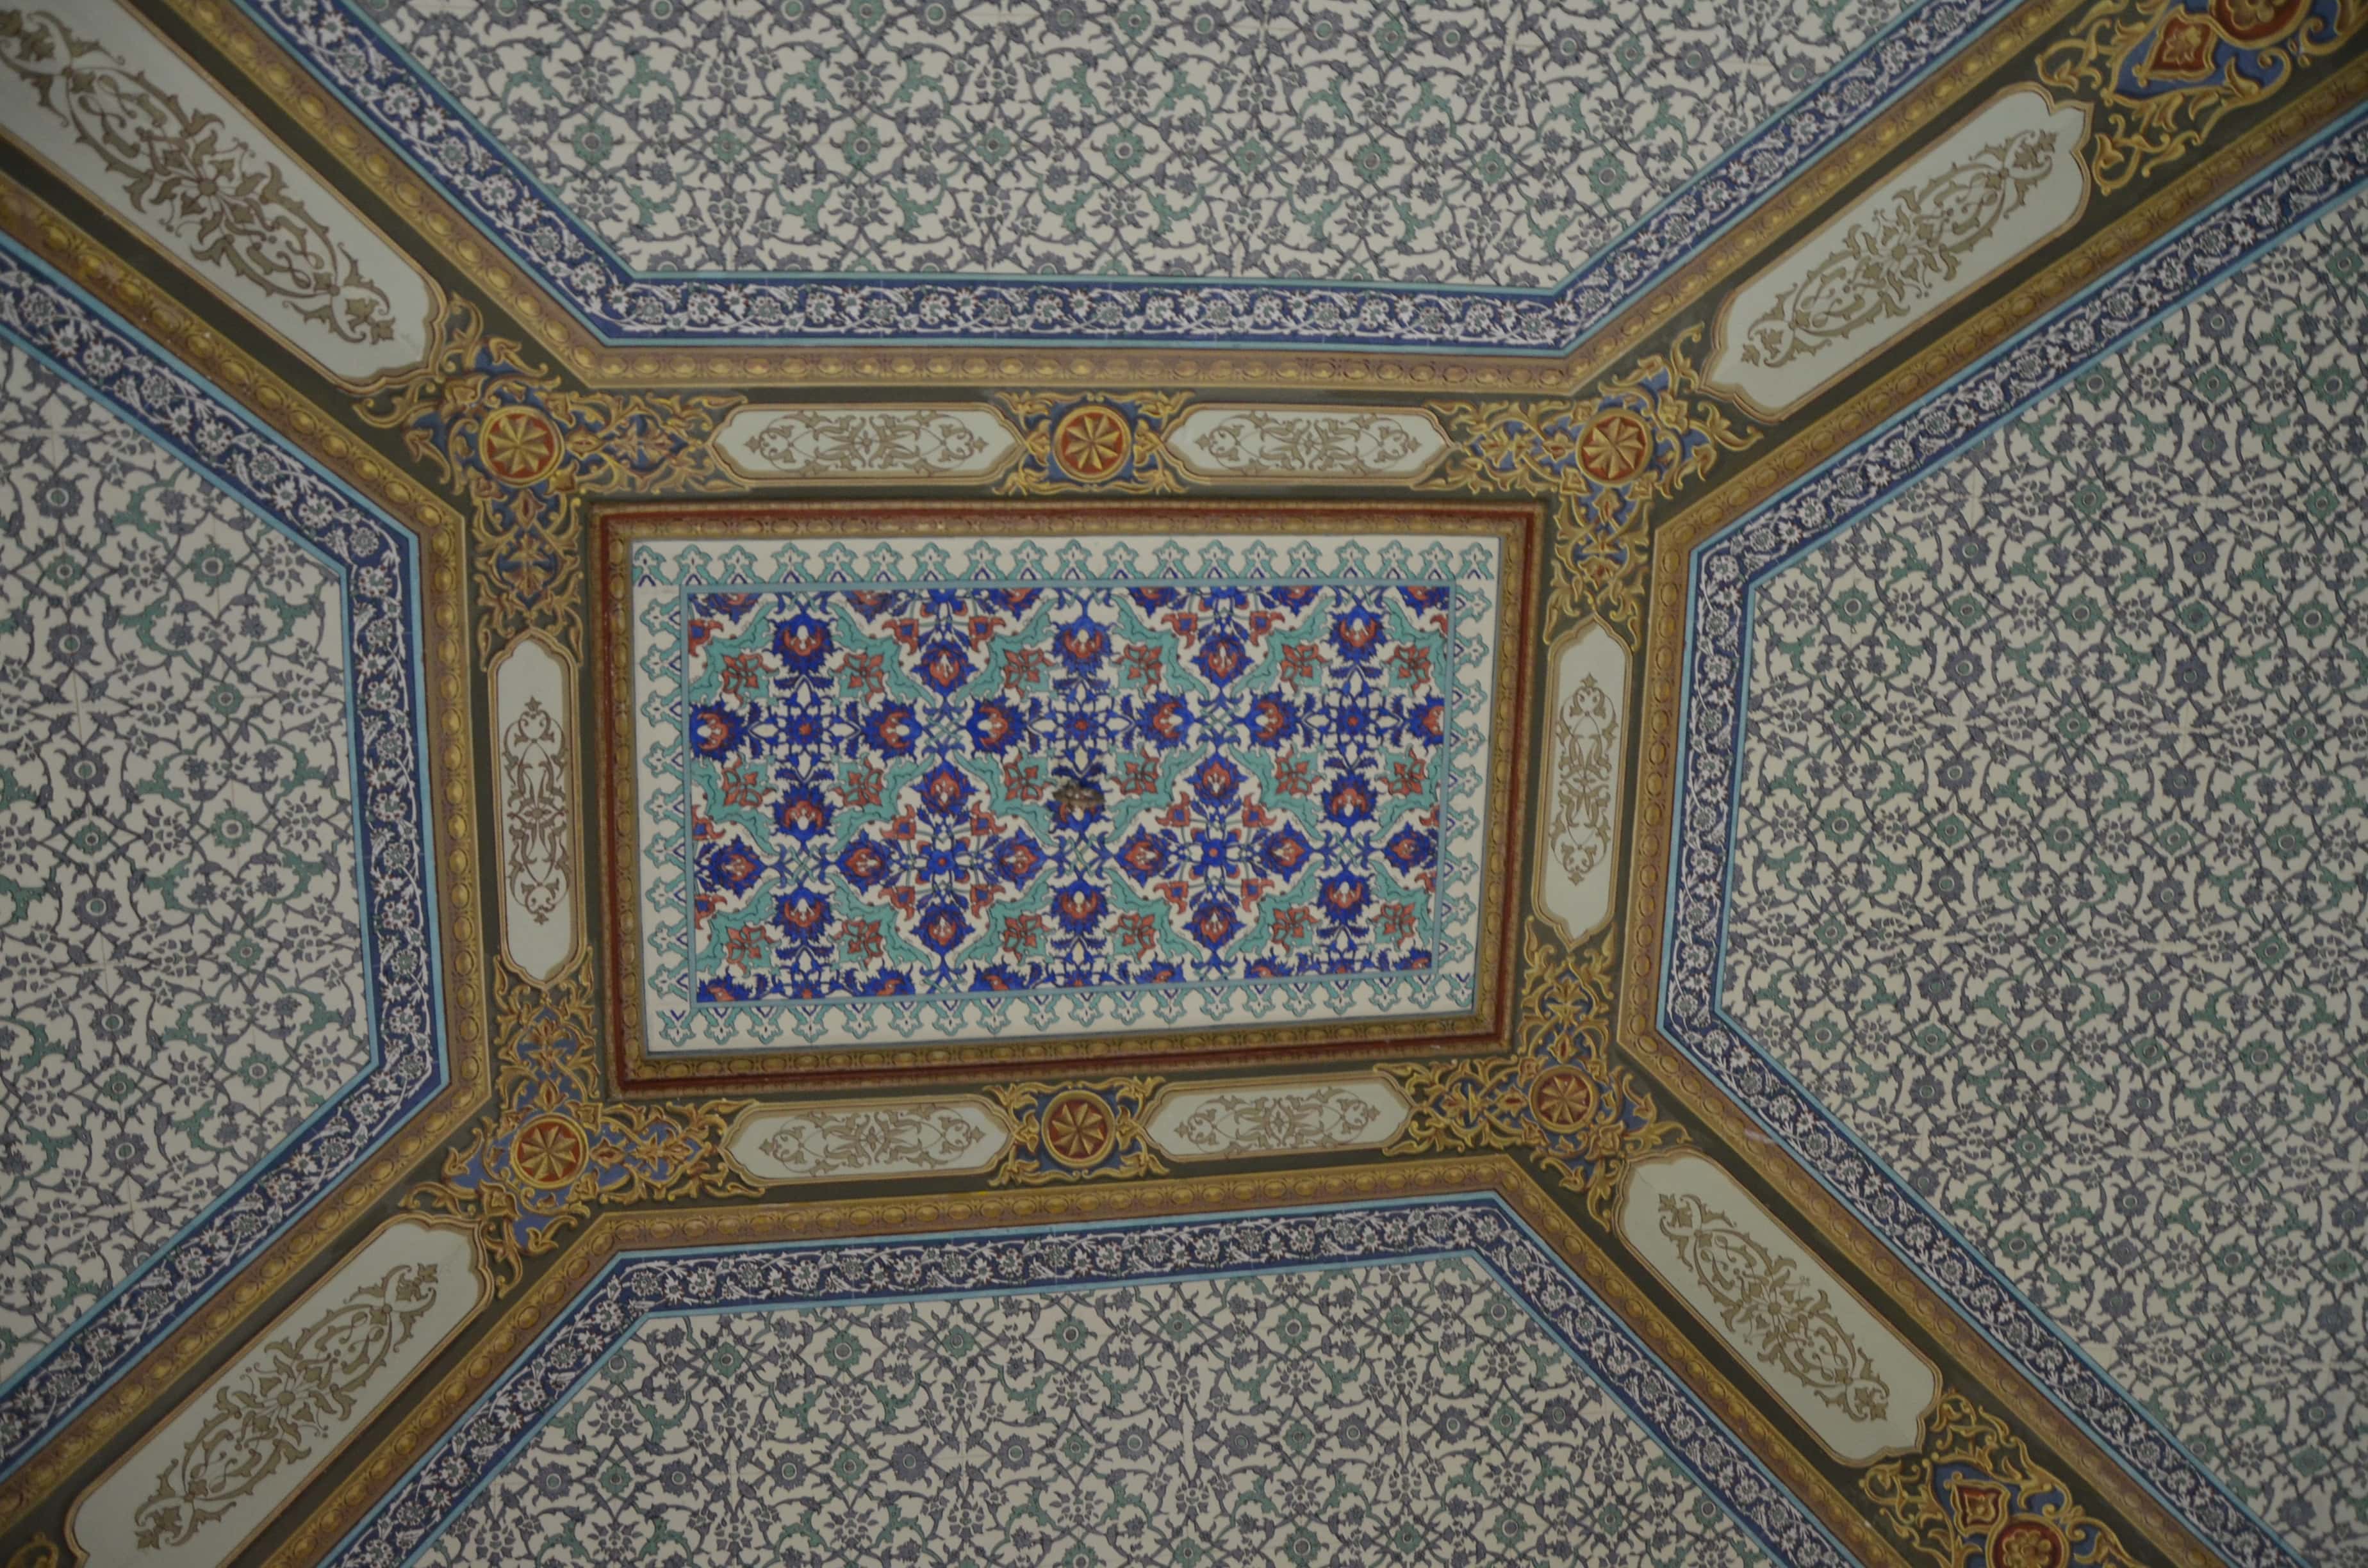 Ceiling of the Circumcision Room at Topkapi Palace in Istanbul, Turkey